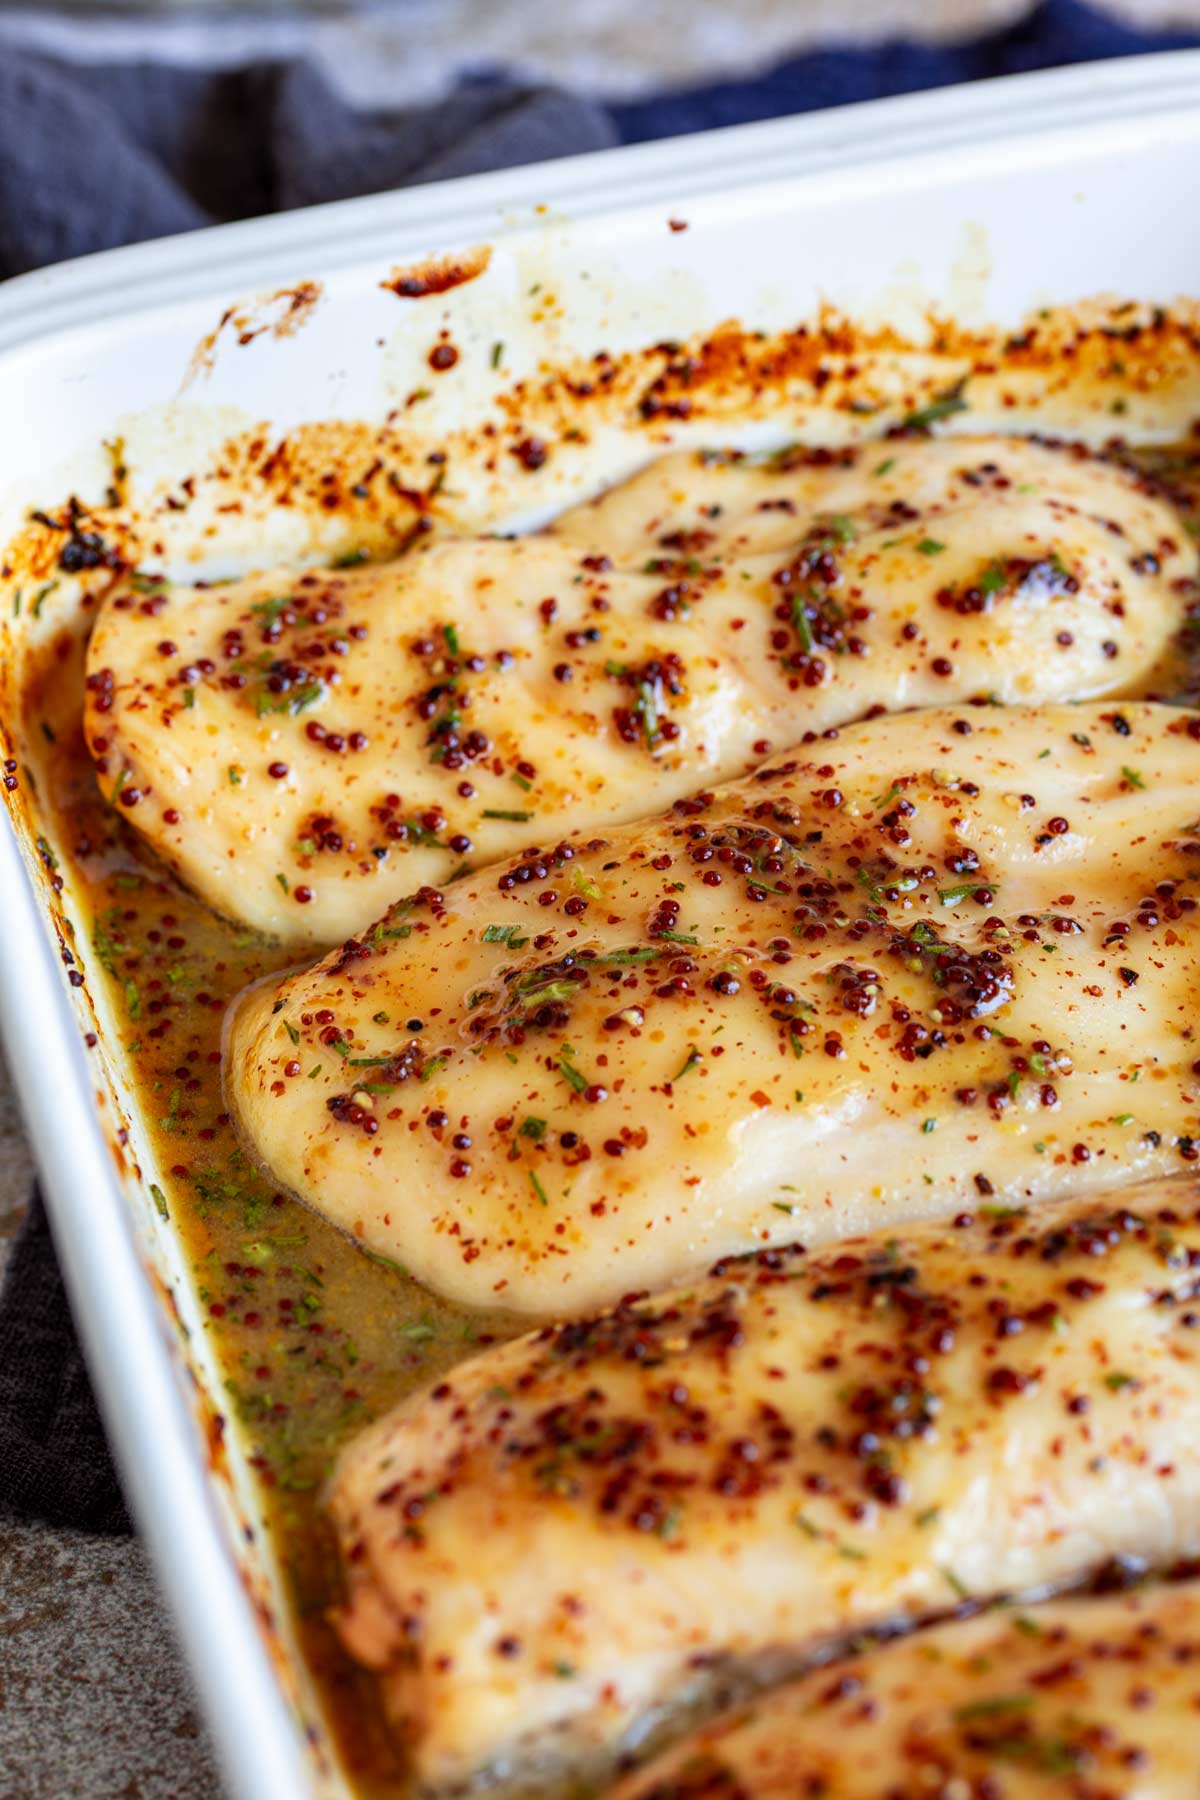 4 chicken breasts in a baking dish with a mustard sauce over them